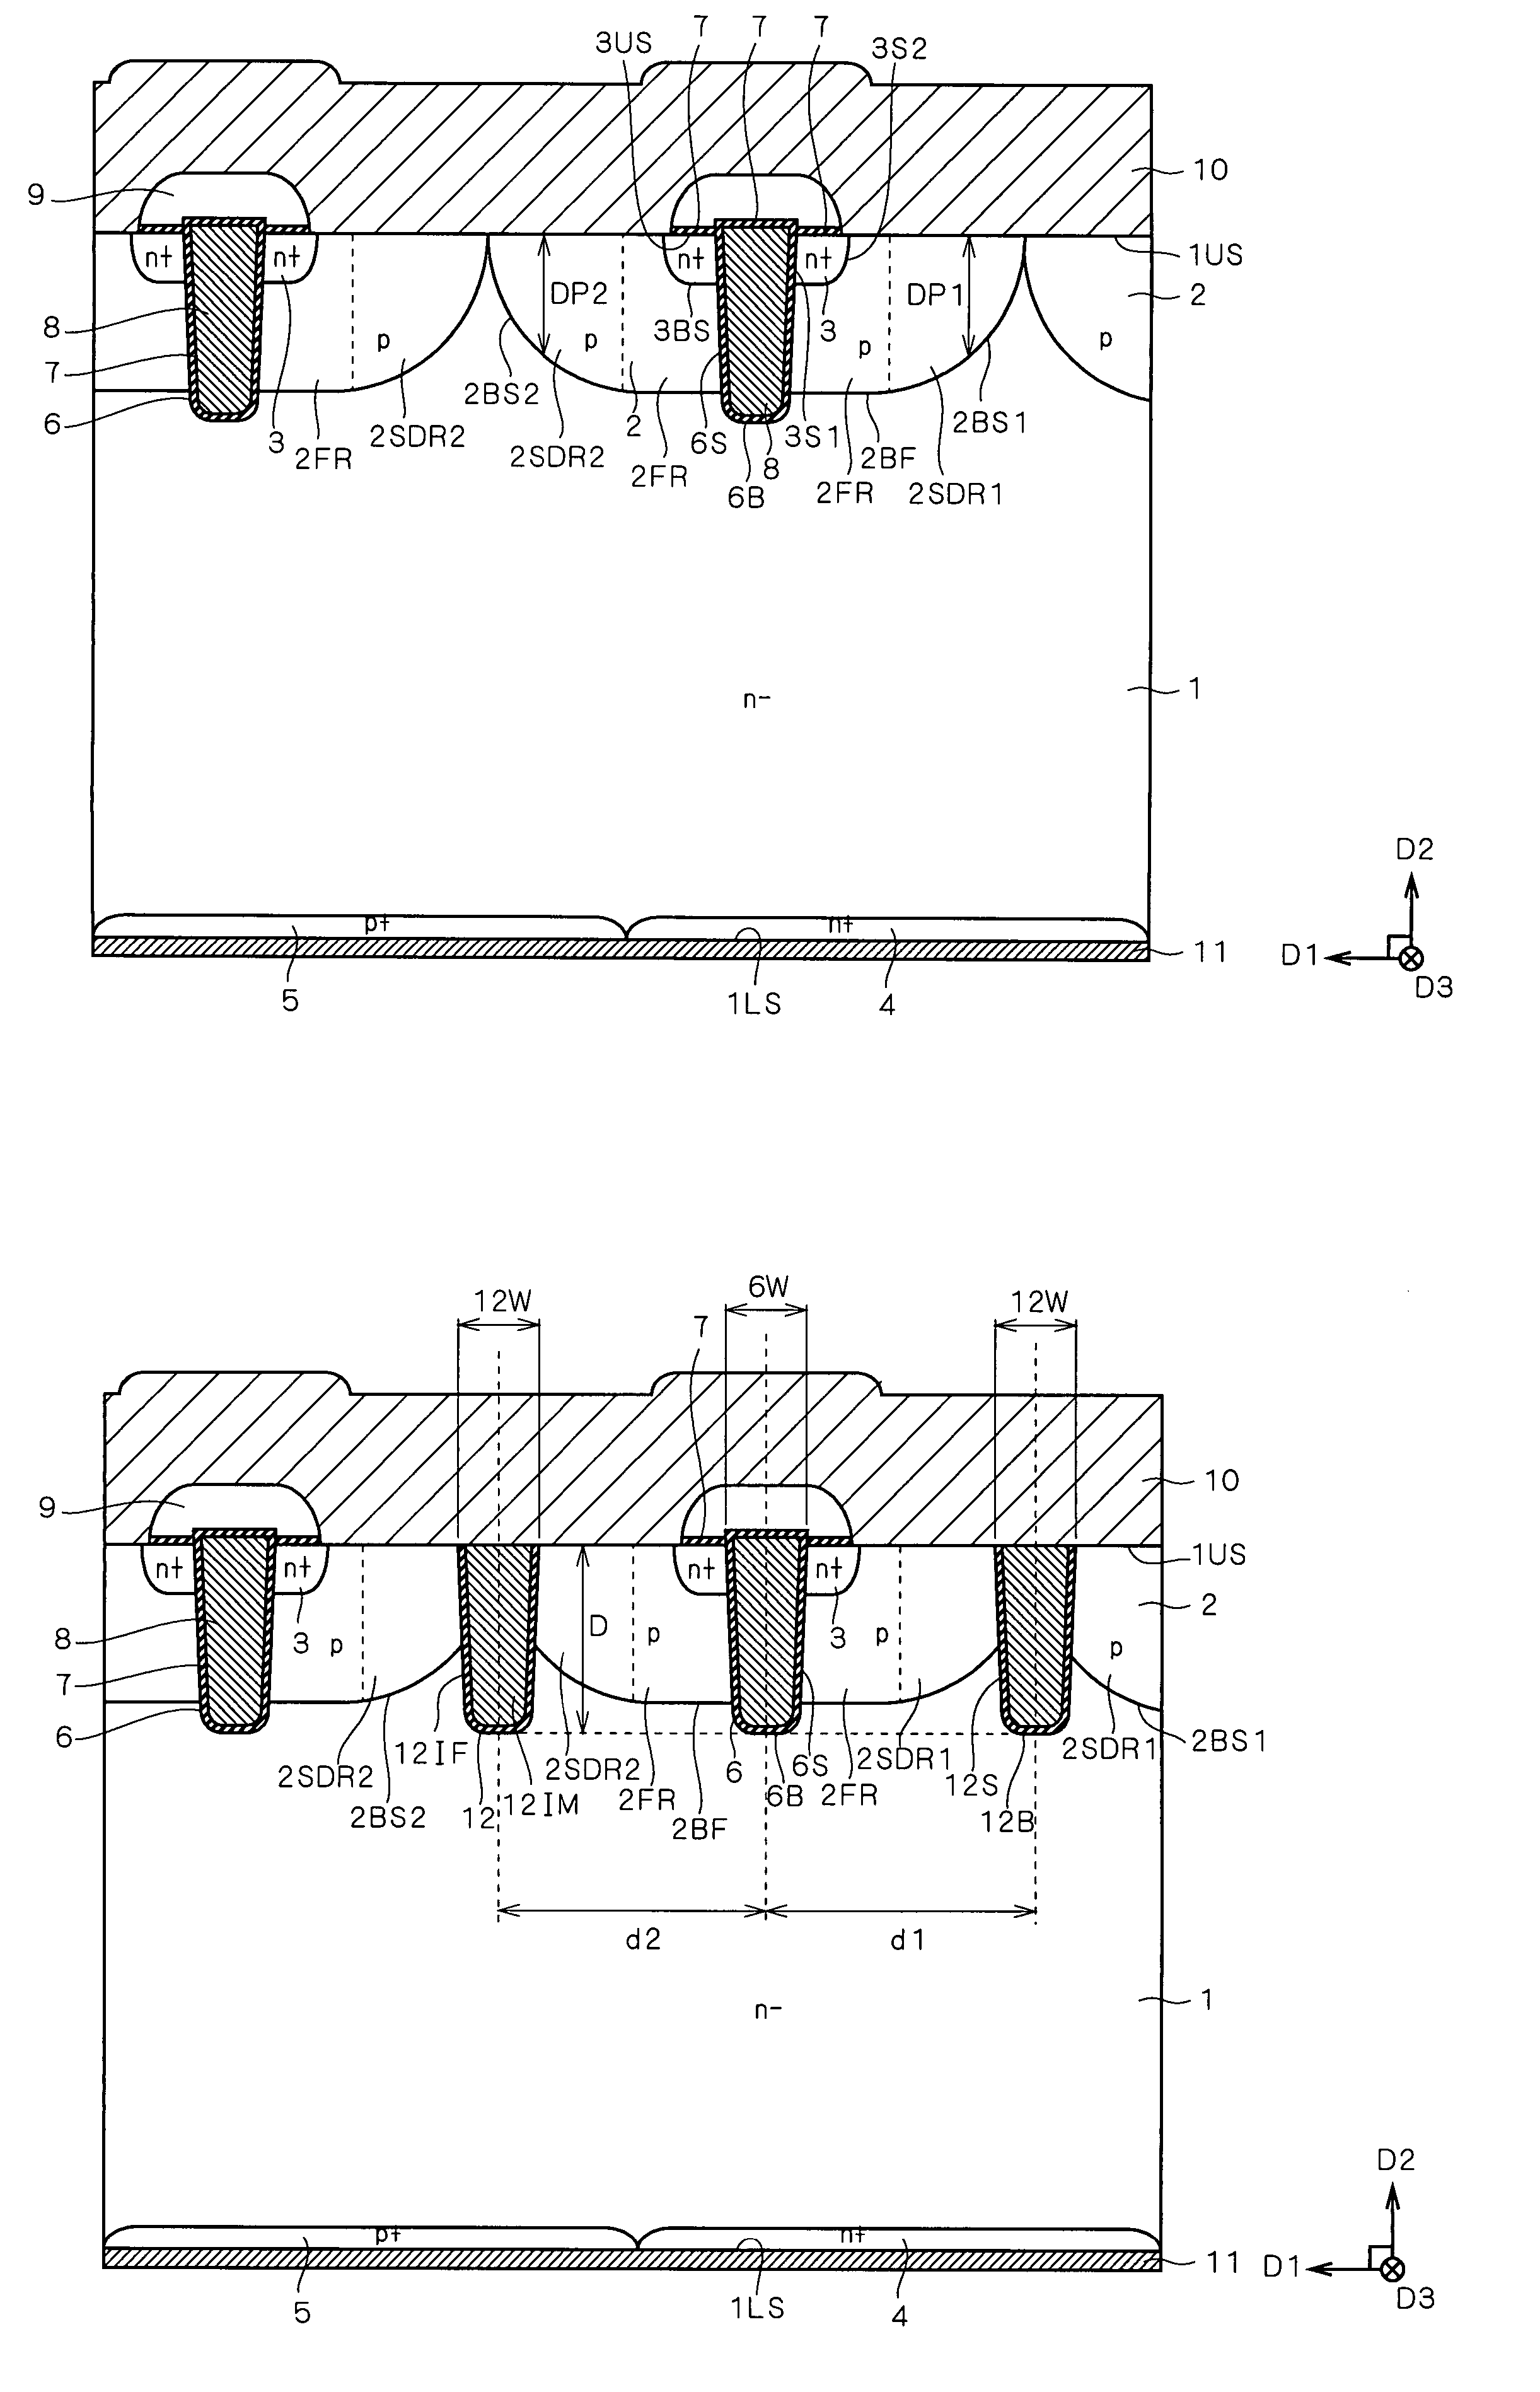 Insulated gate transistor incorporating diode